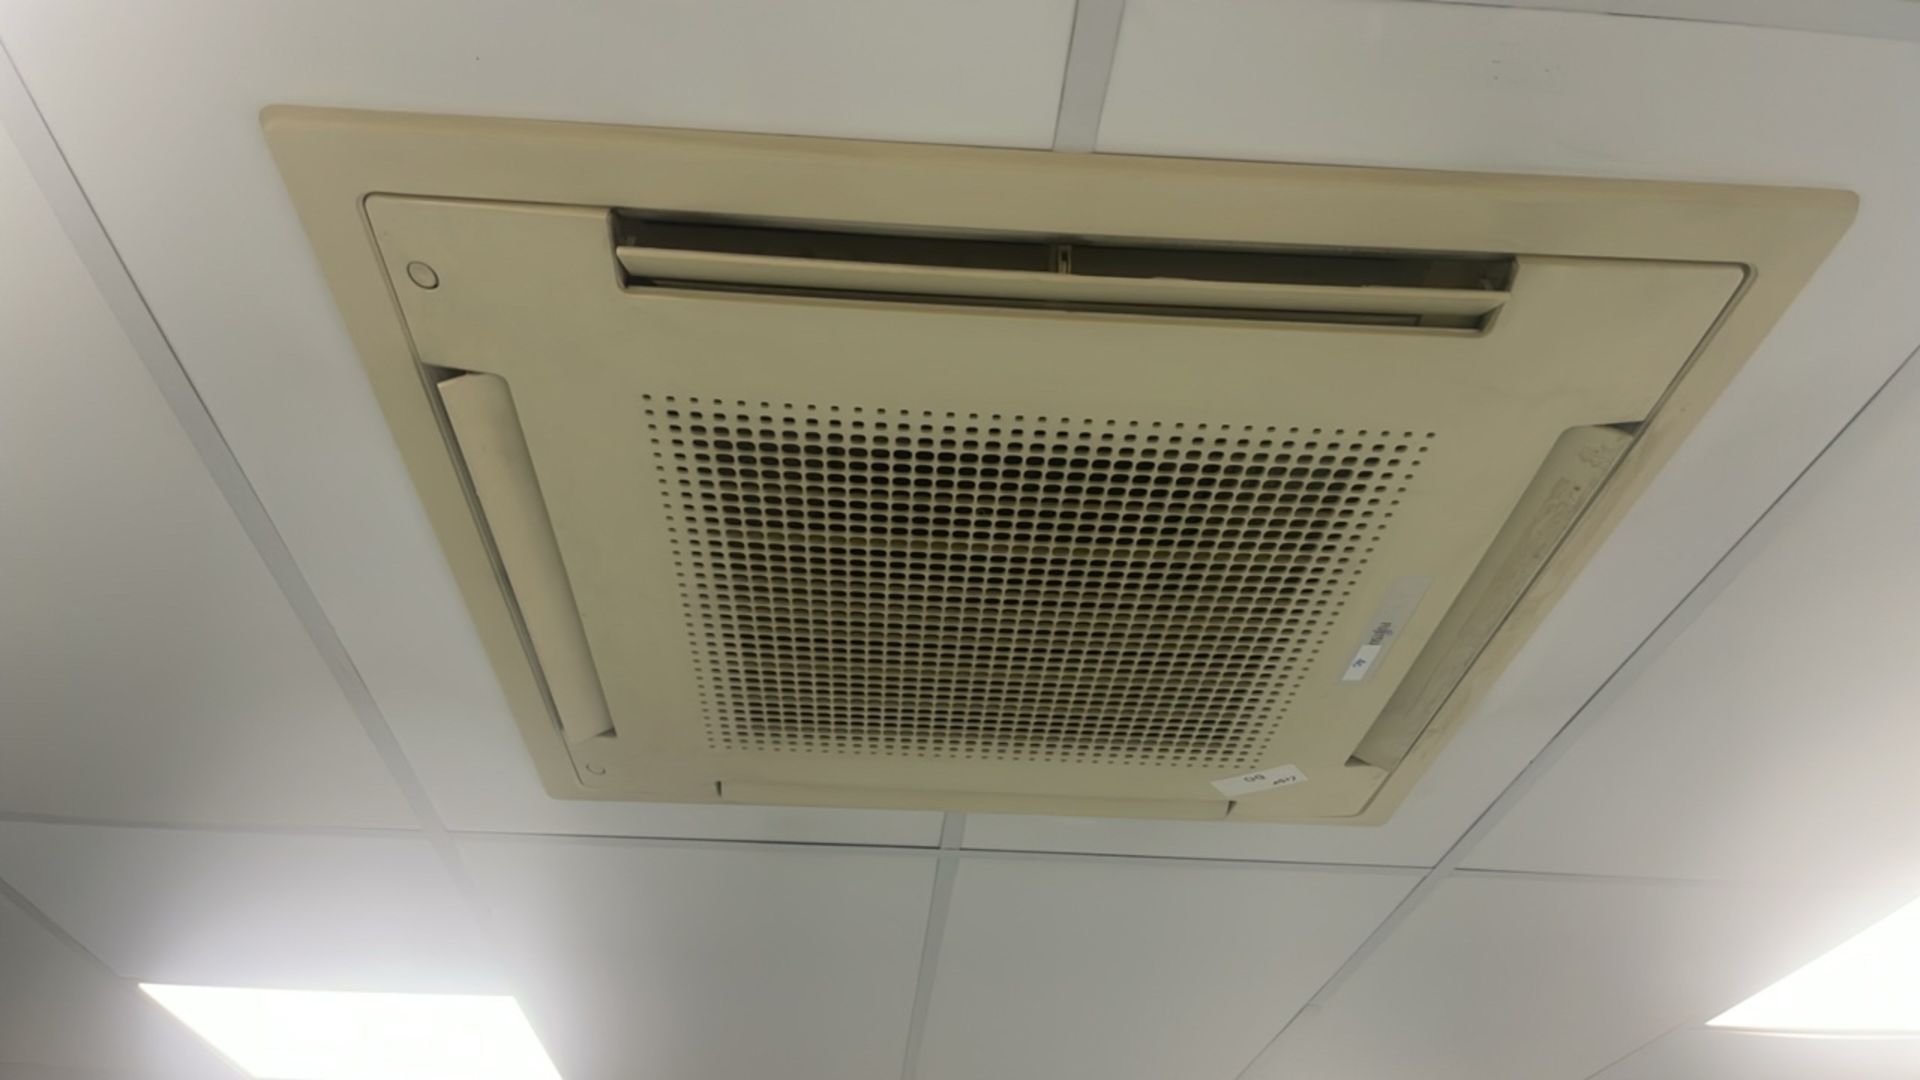 Fujitsu Air Conditioning Ceiling Cassette - Image 3 of 4